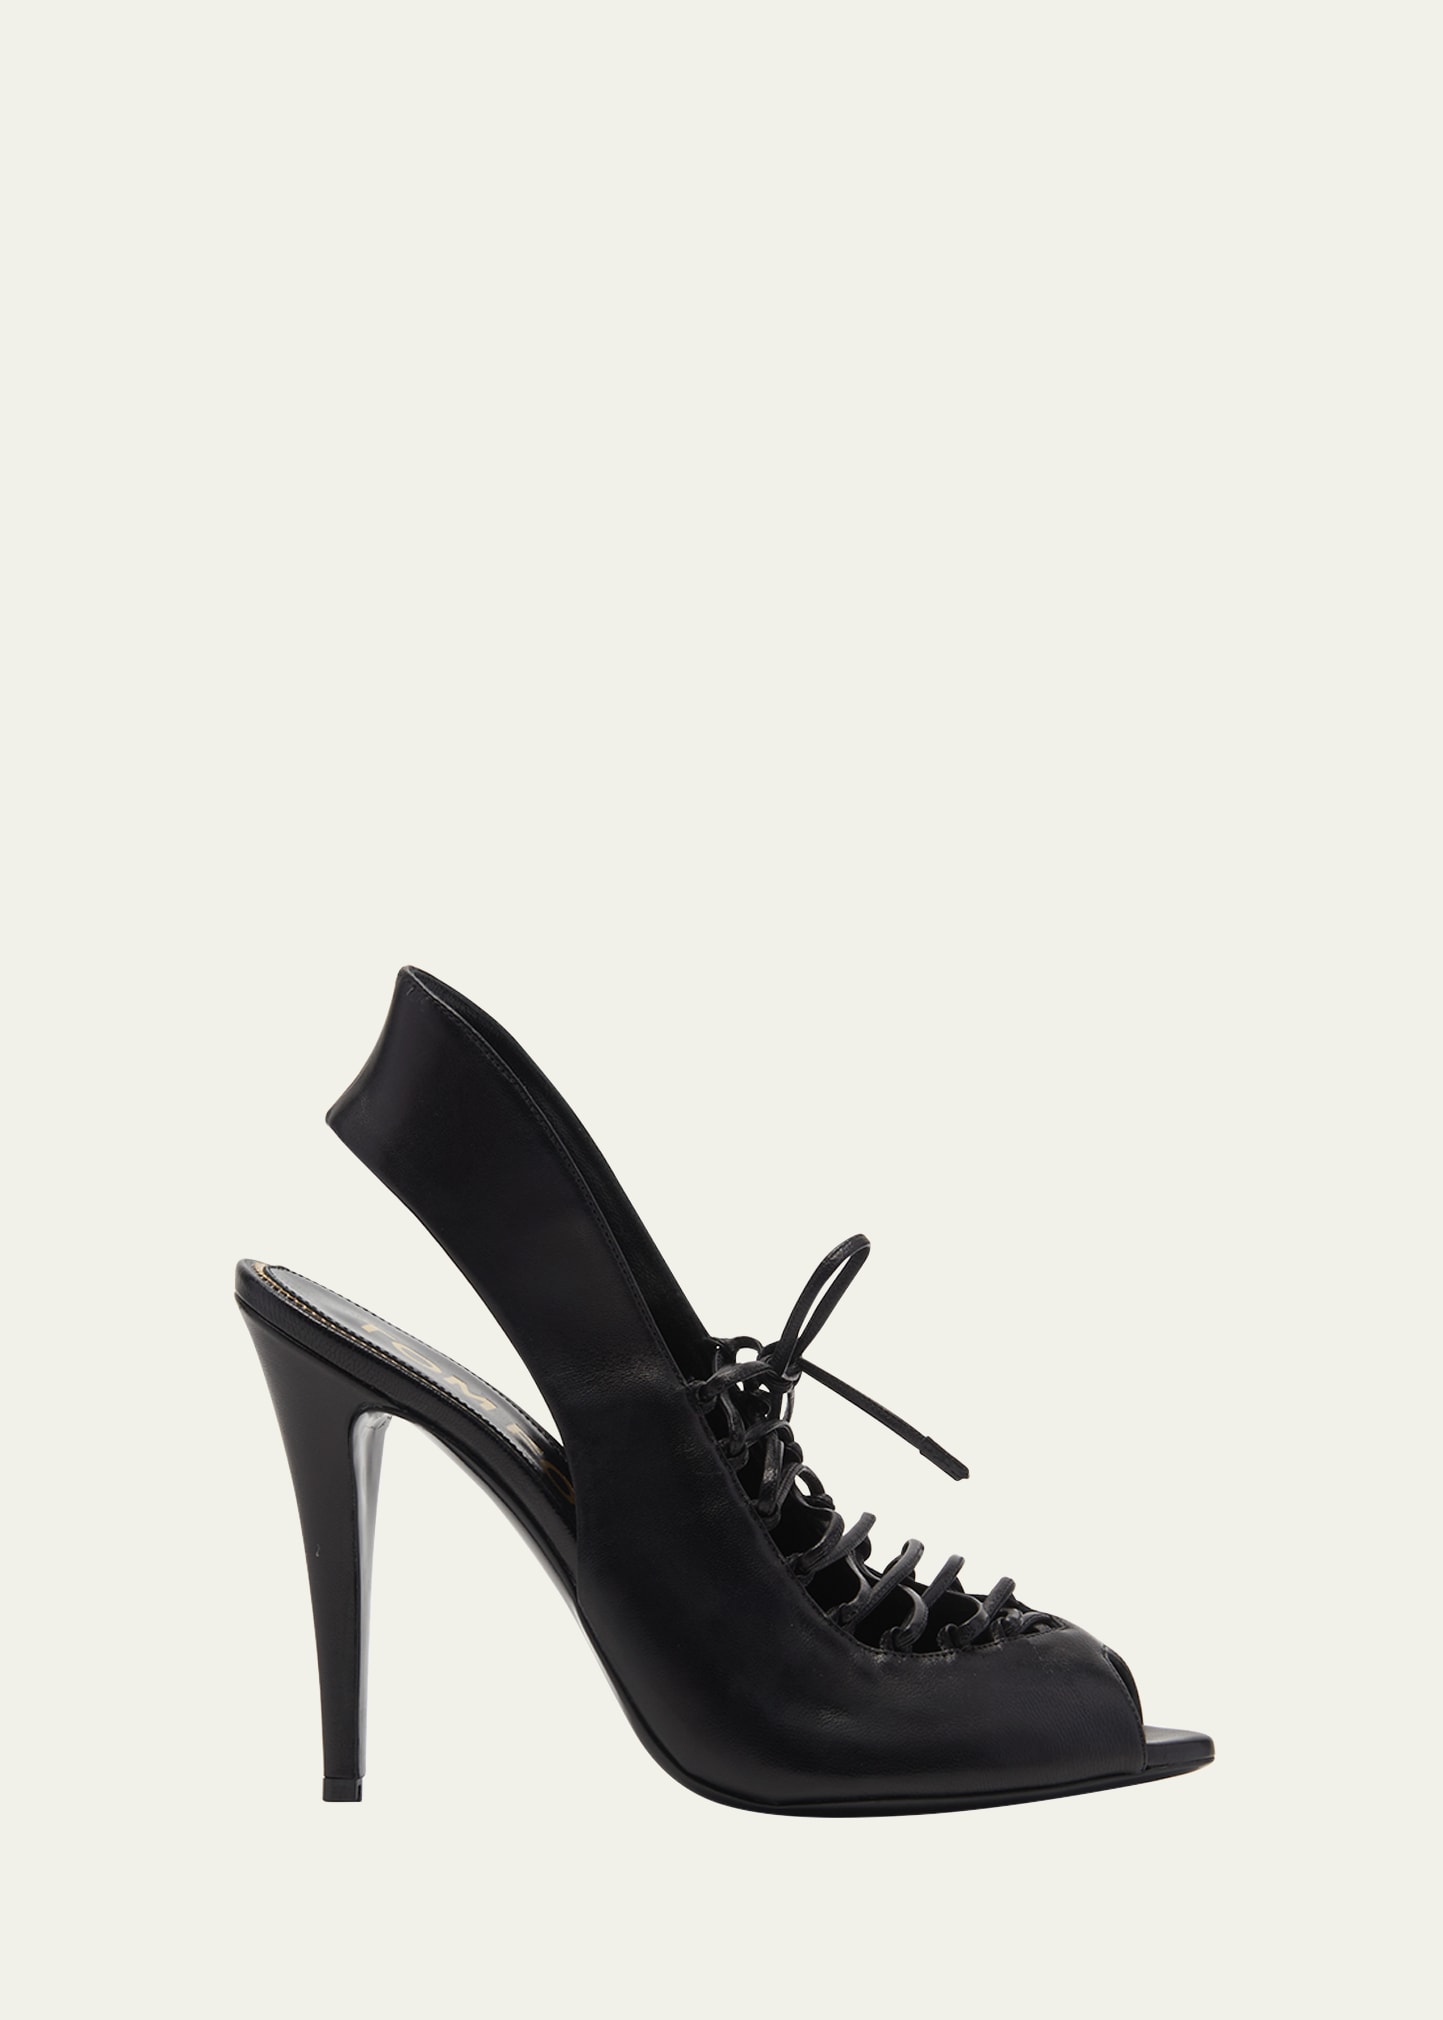 TOM FORD 105MM PEEP-TOE LACE-UP LEATHER PUMPS